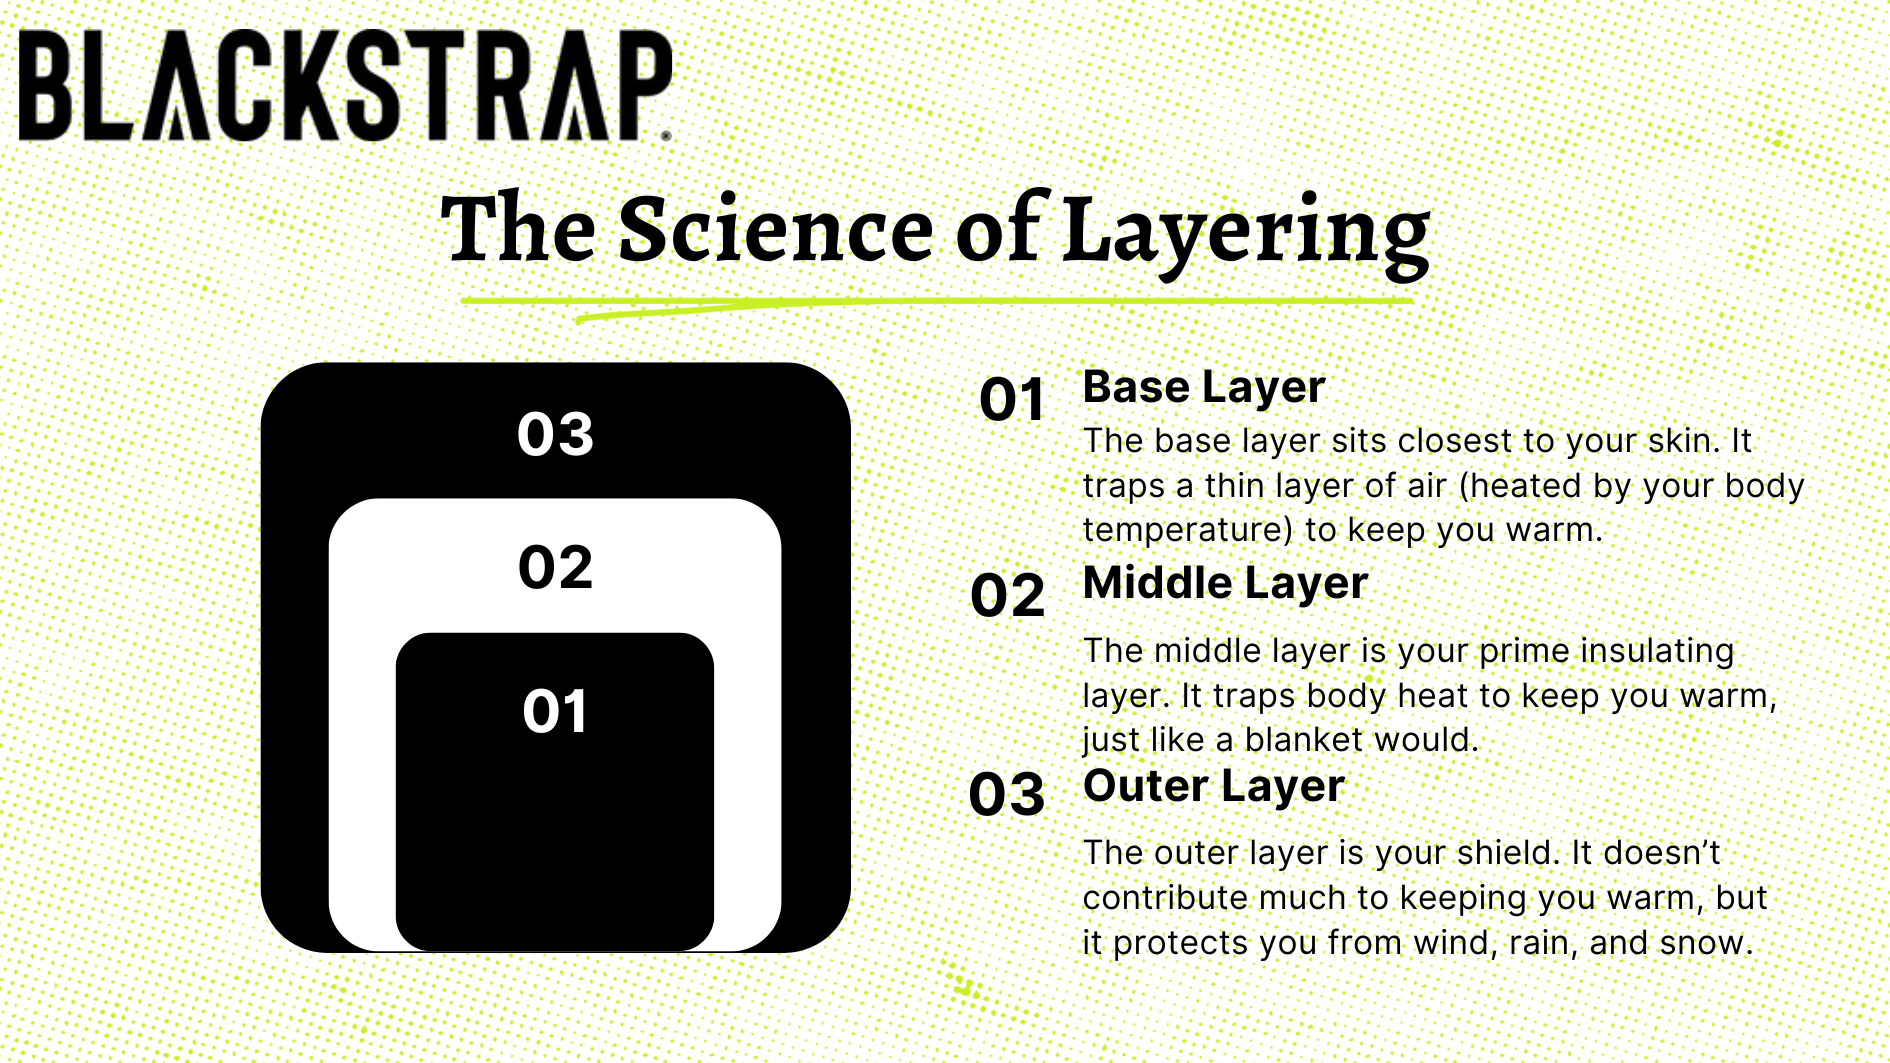 Infographic showing the science of layering and how base layers, middle layers and out layers are used.